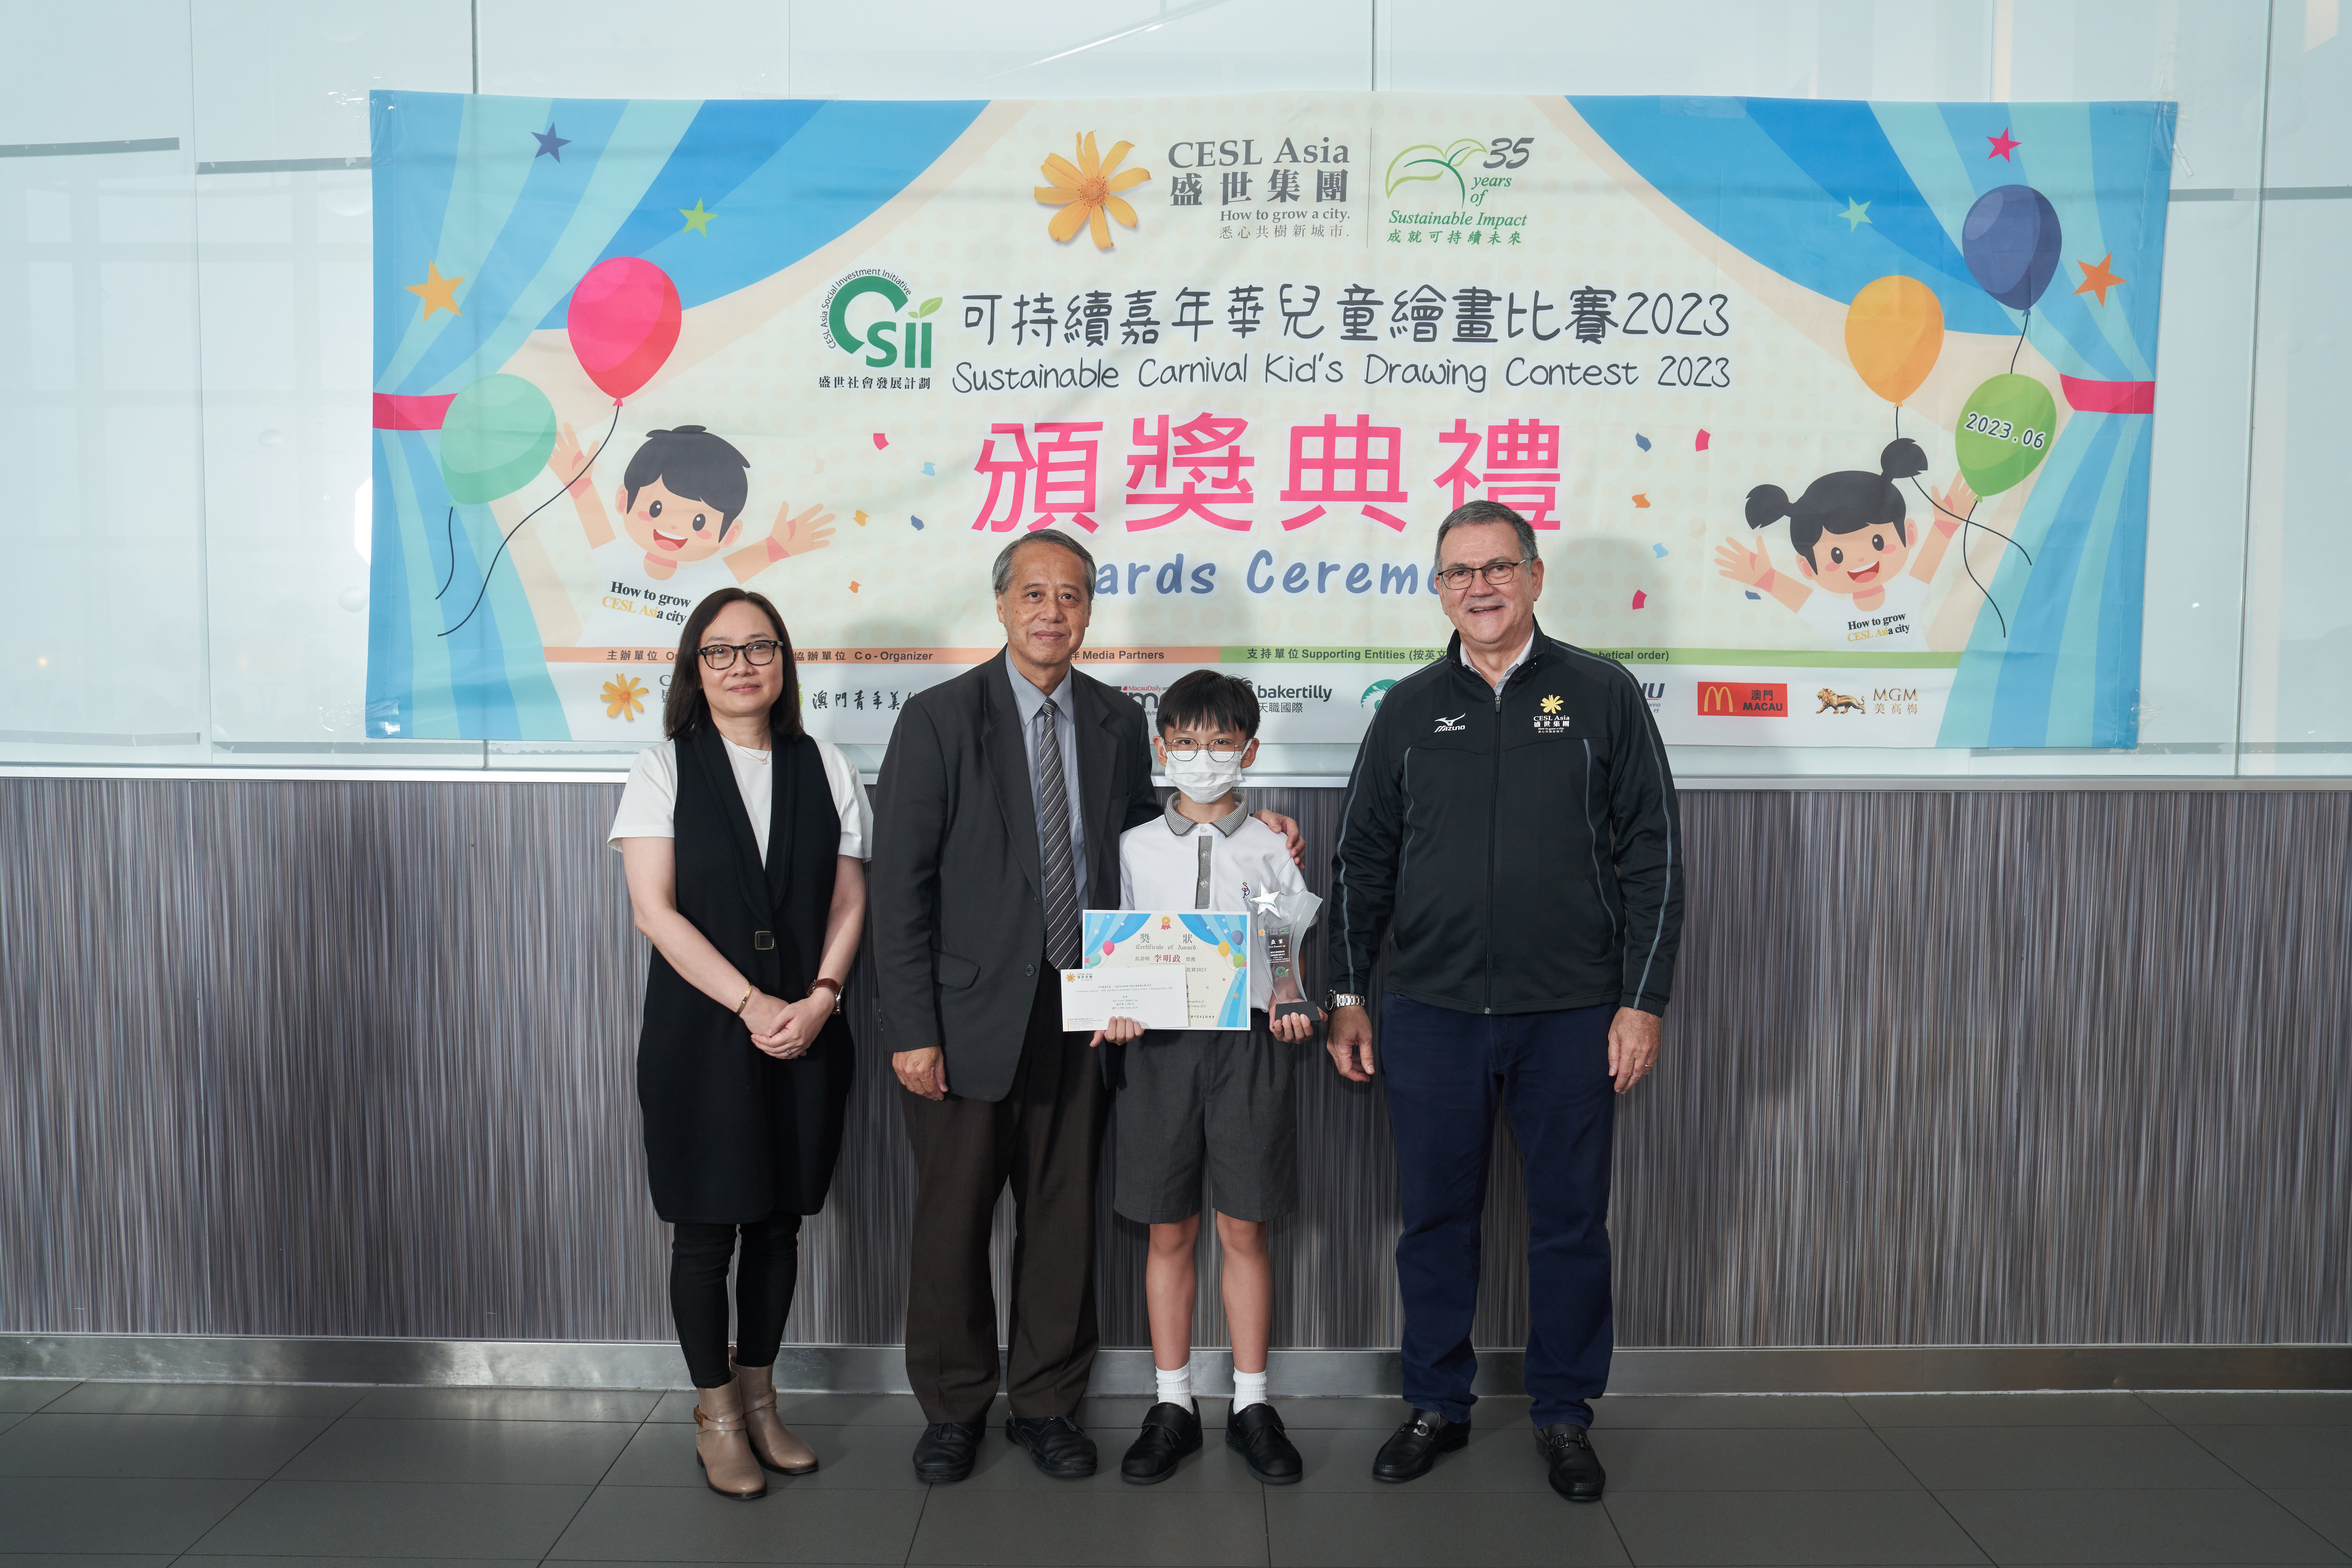 CESL Asia kid’s Drawing Contest 2023 Awards Ceremony